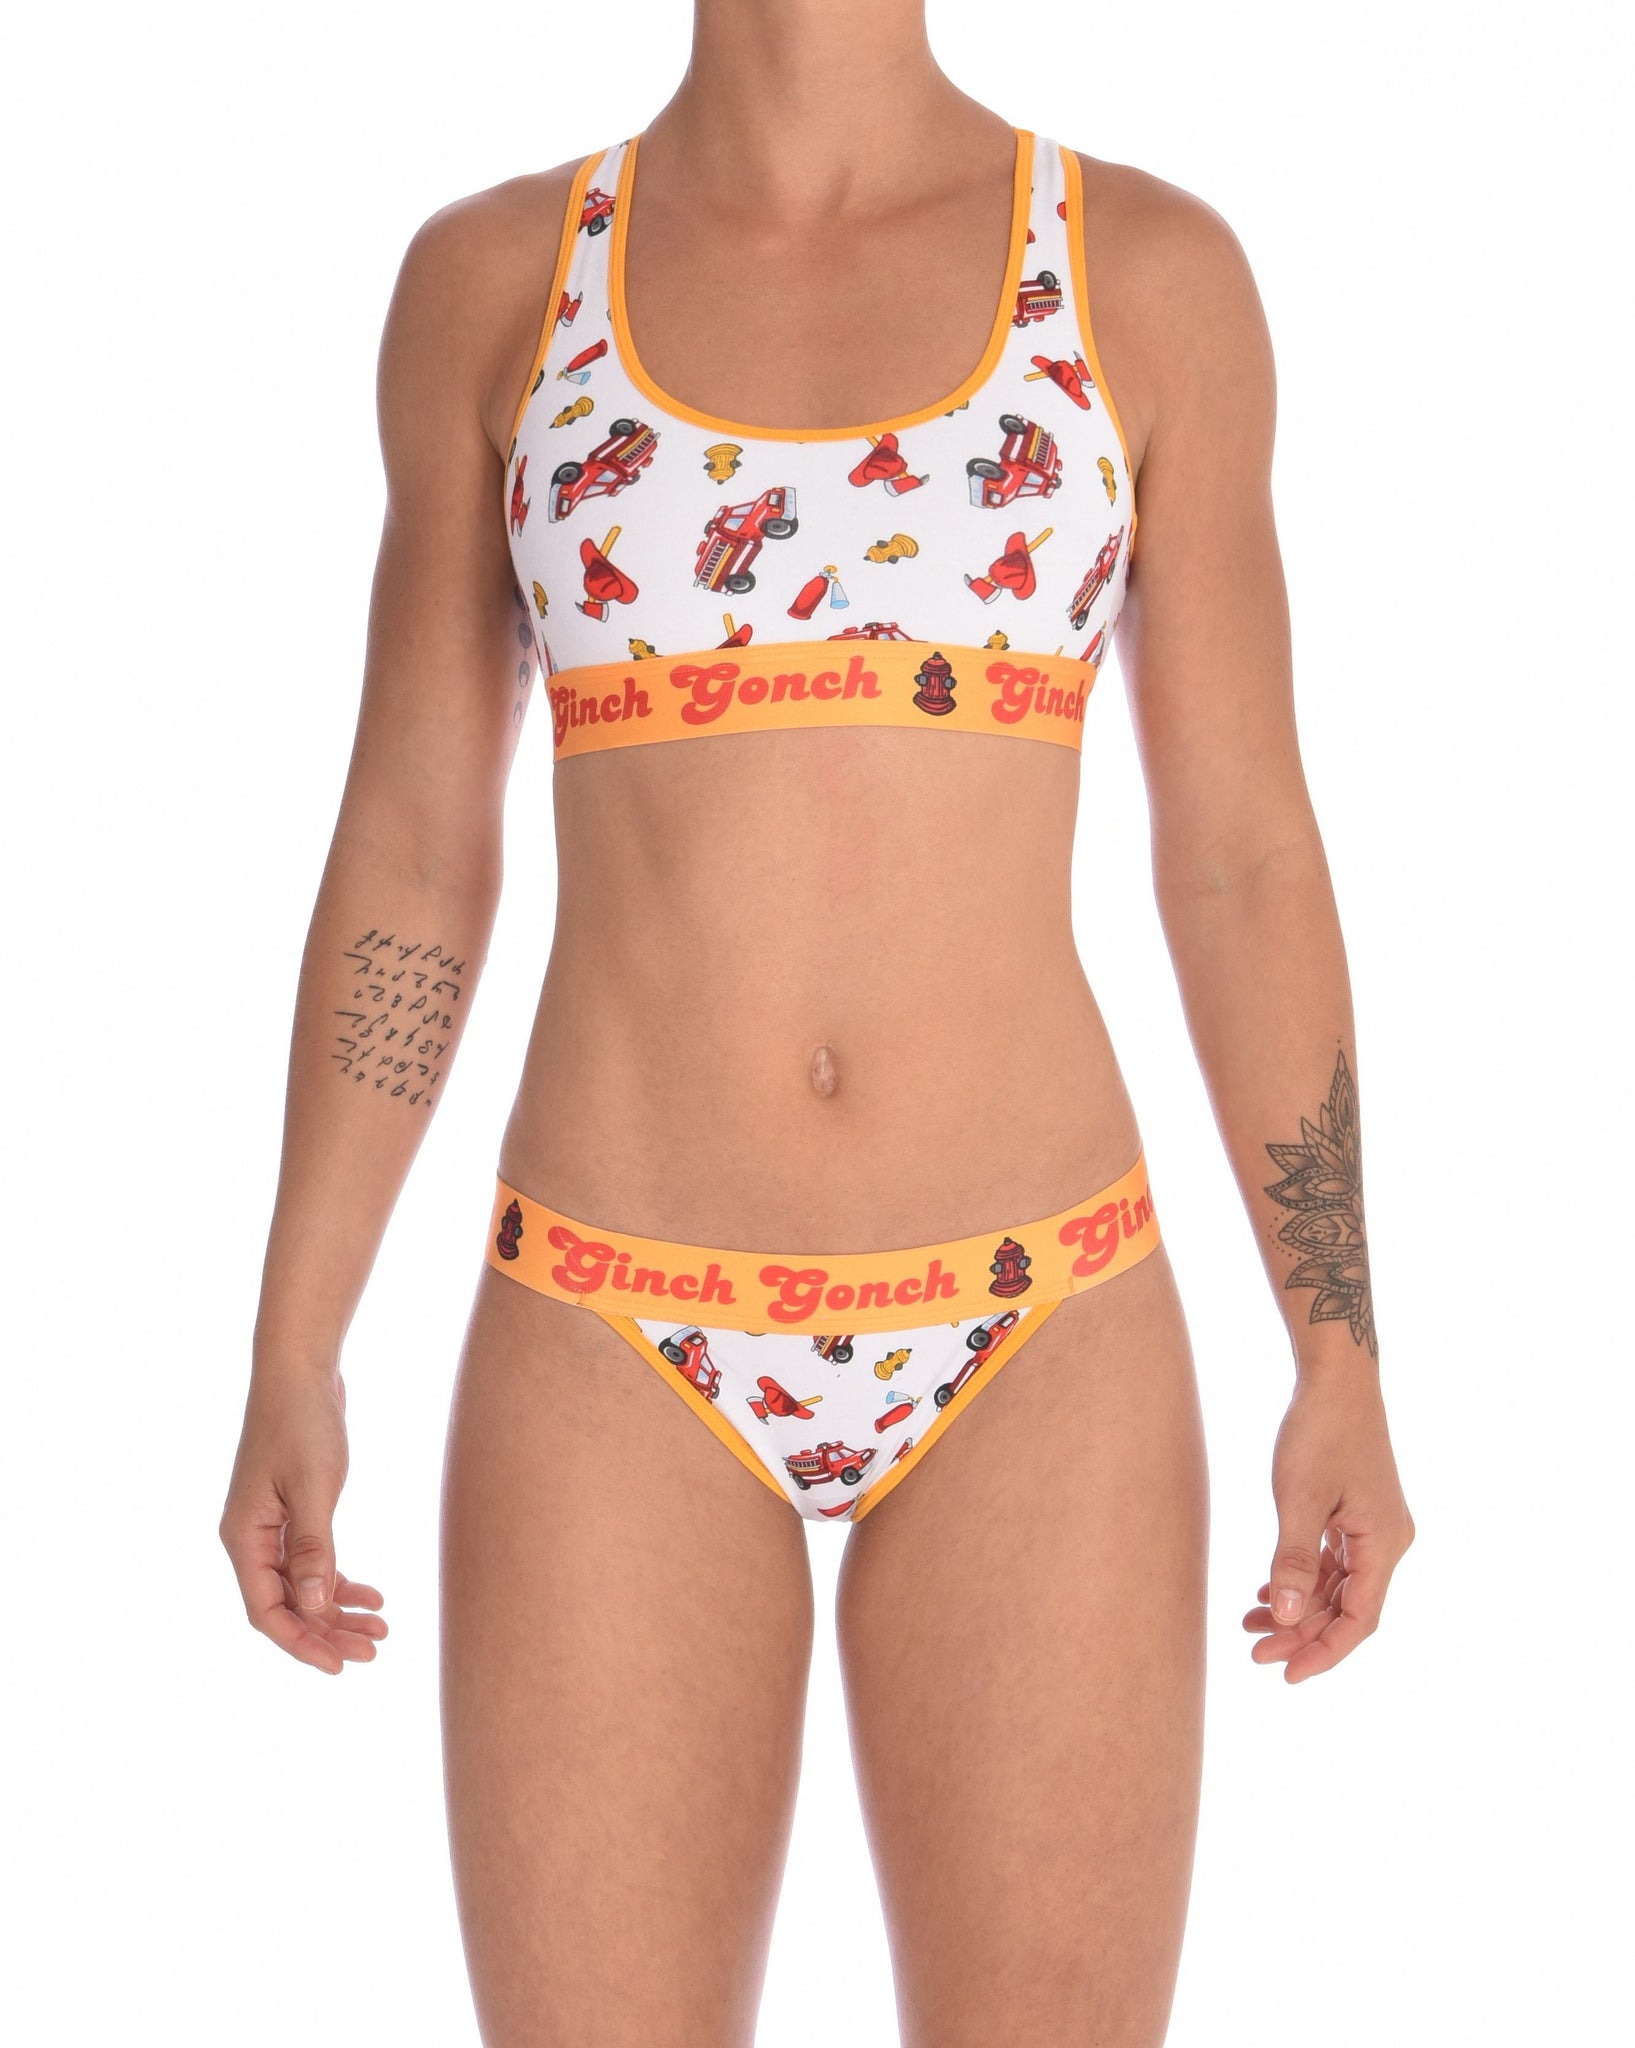 Ginch Gonch GG Fire Fighters sports bra women's underwear y front white fabric with fire engines hats and hydrants, yellow trim and yellow printed band front shown with matching thong